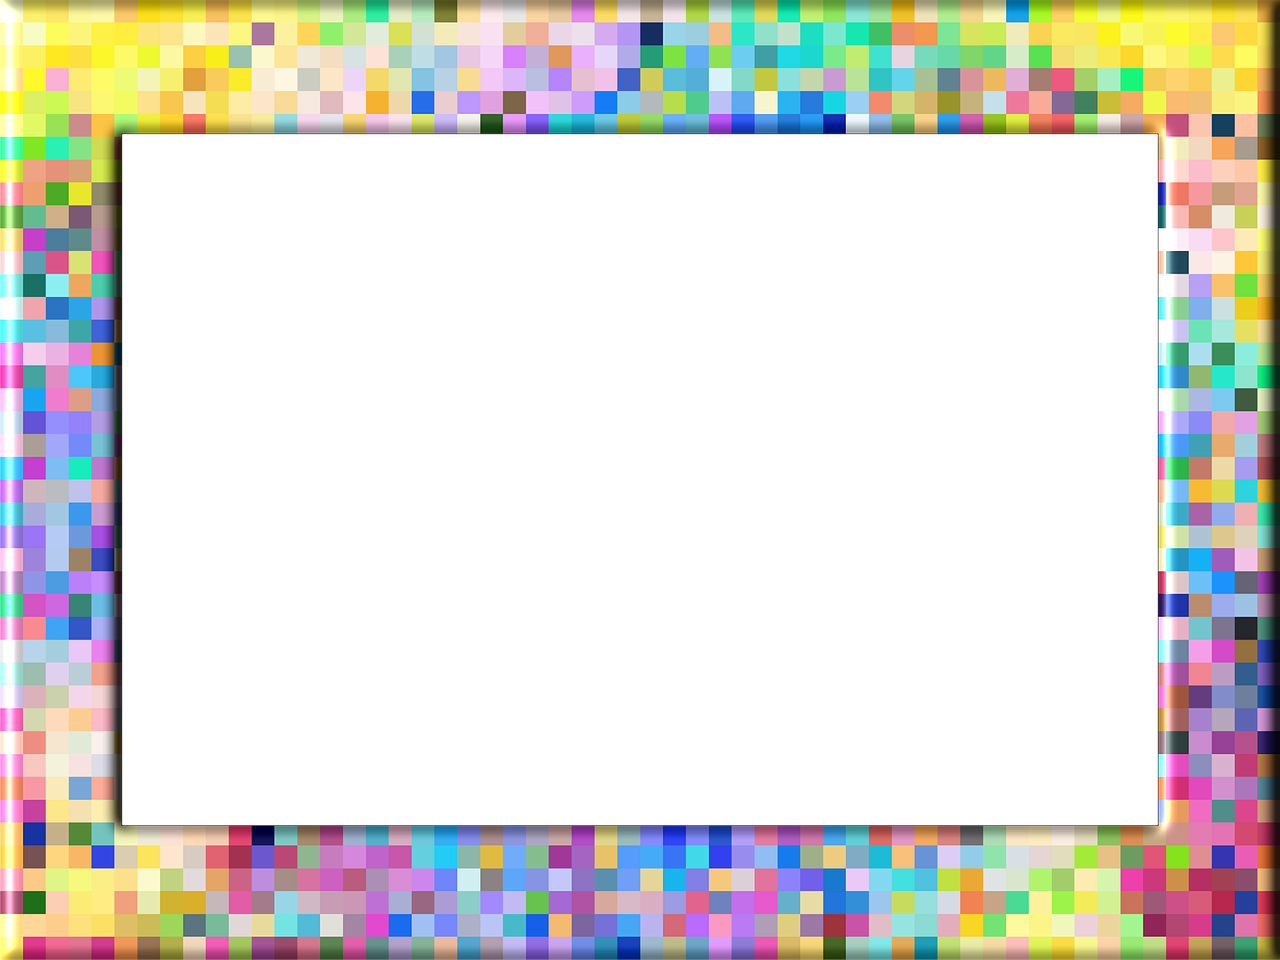 a picture of a picture of a picture of a picture of a picture of a picture of a picture of a picture of a picture of a, pixel art, flickr, solid black #000000 background, wide frame, faded lsd colors, multicolored glints